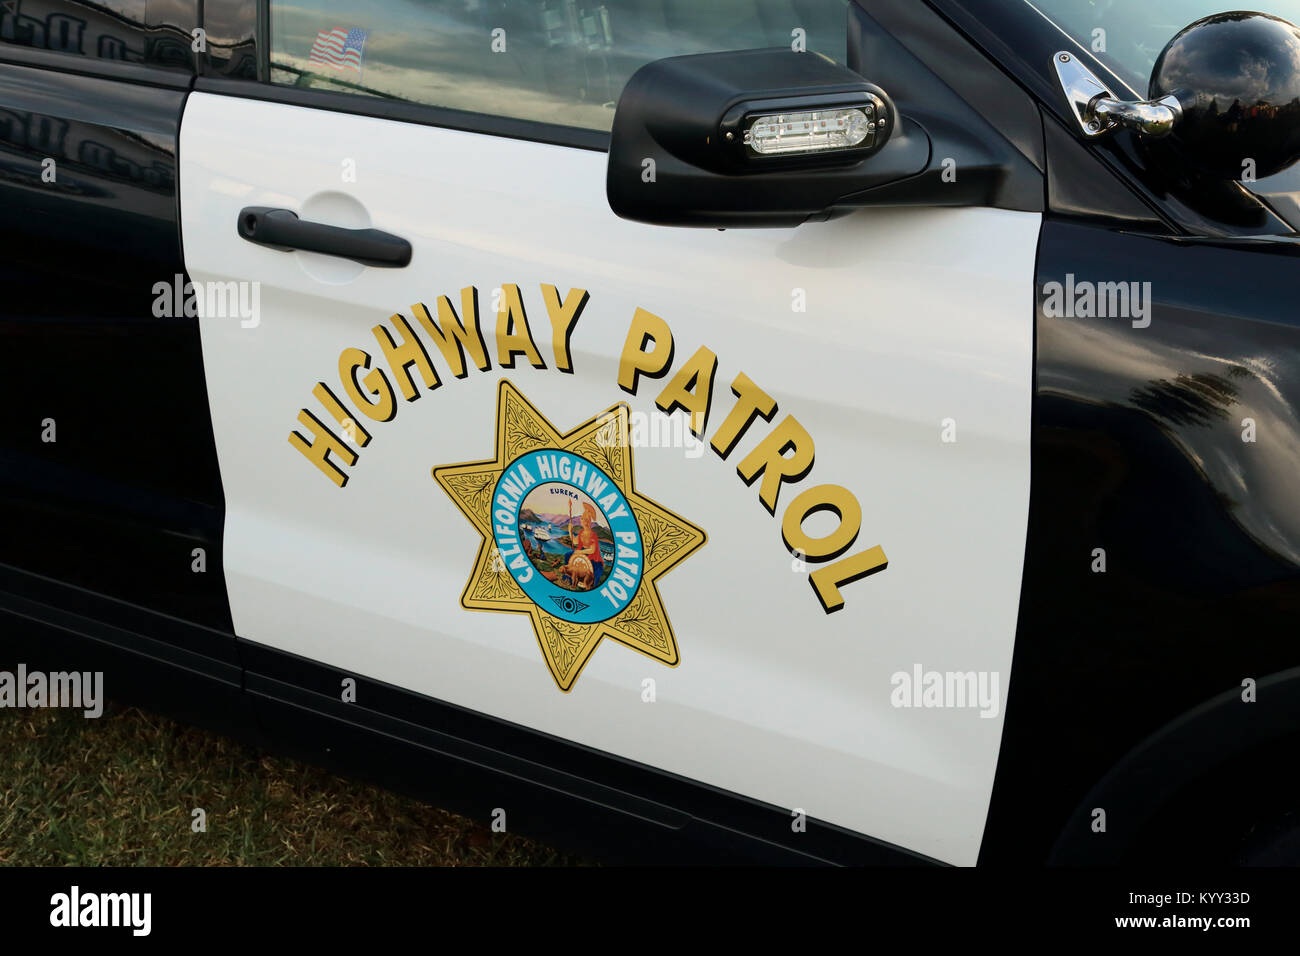 Van Nuys, CA / USA - October 23, 2016: A police car bearing the California Highway Patrol logo is shown on display at a community resource fair. Stock Photo